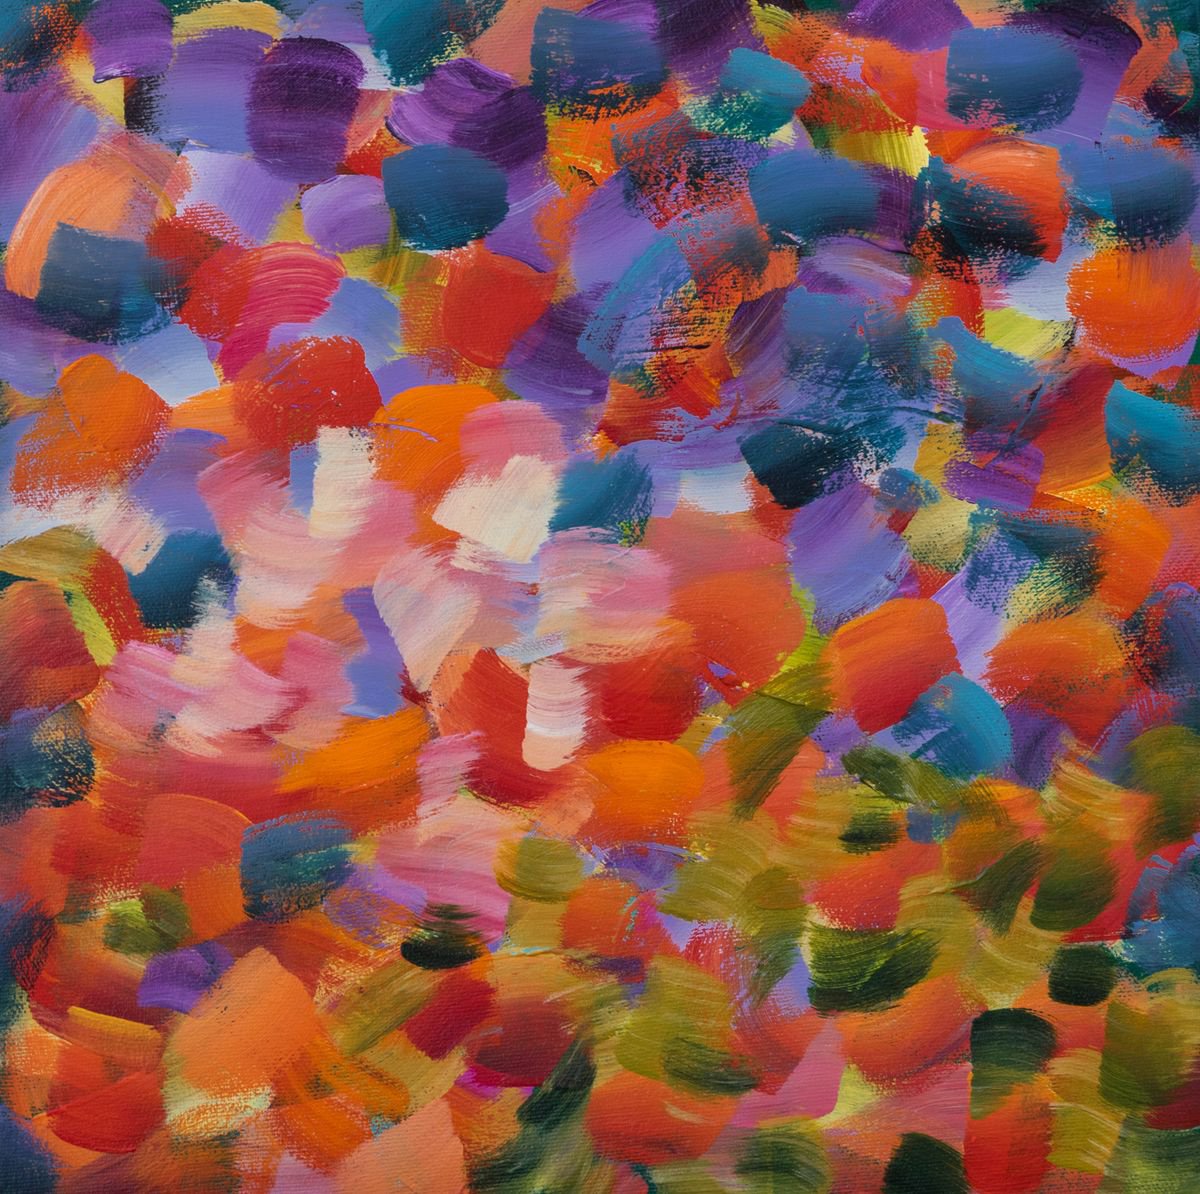 Effervescence 6 - Original acrylic square painting on canvas - Ready to hang by Chantal Proulx